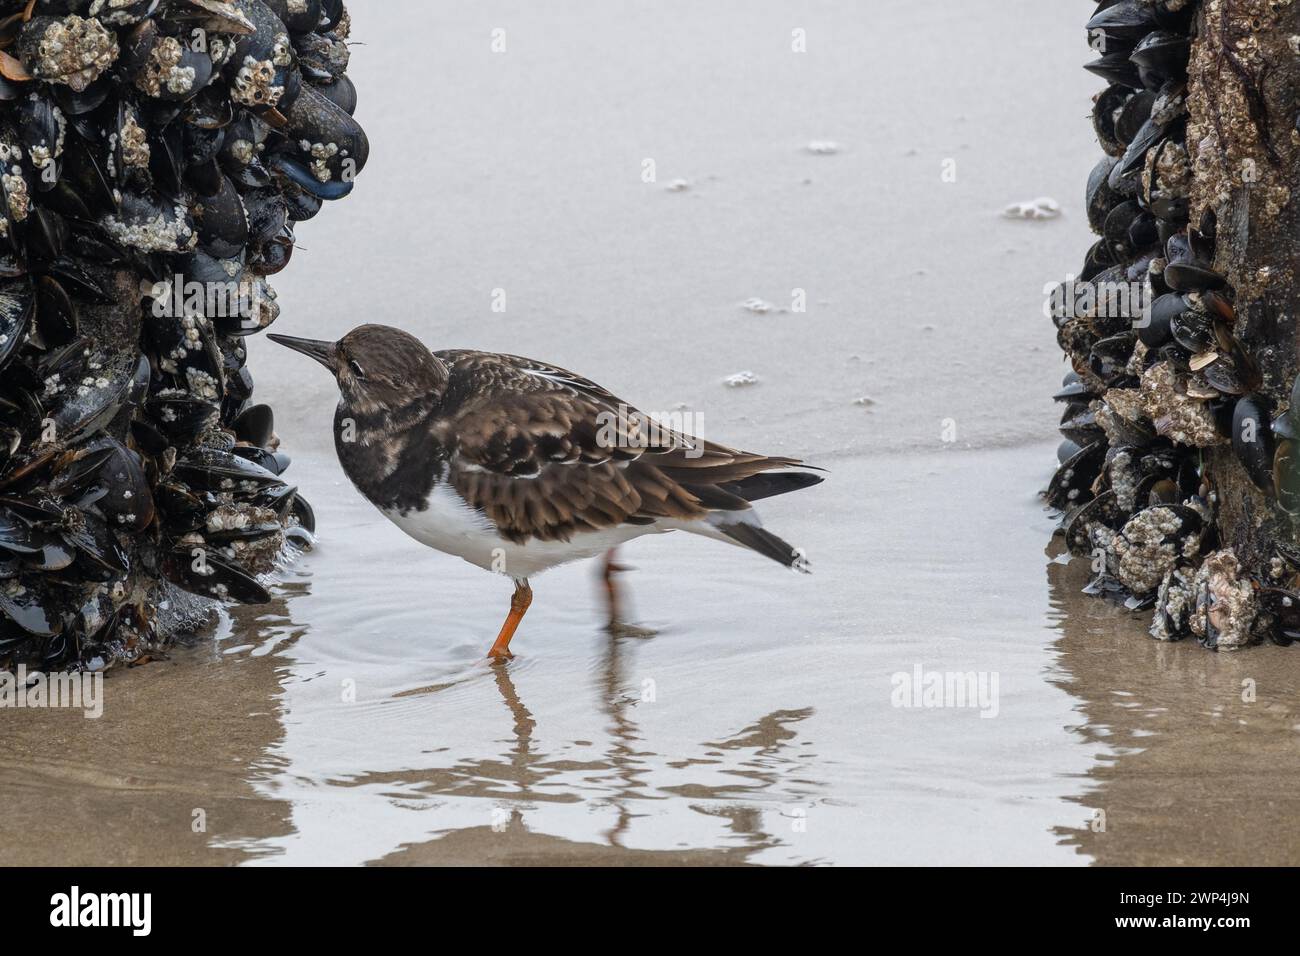 A sandpiper next to shells at the edge of the water on a sandy beach Stock Photo